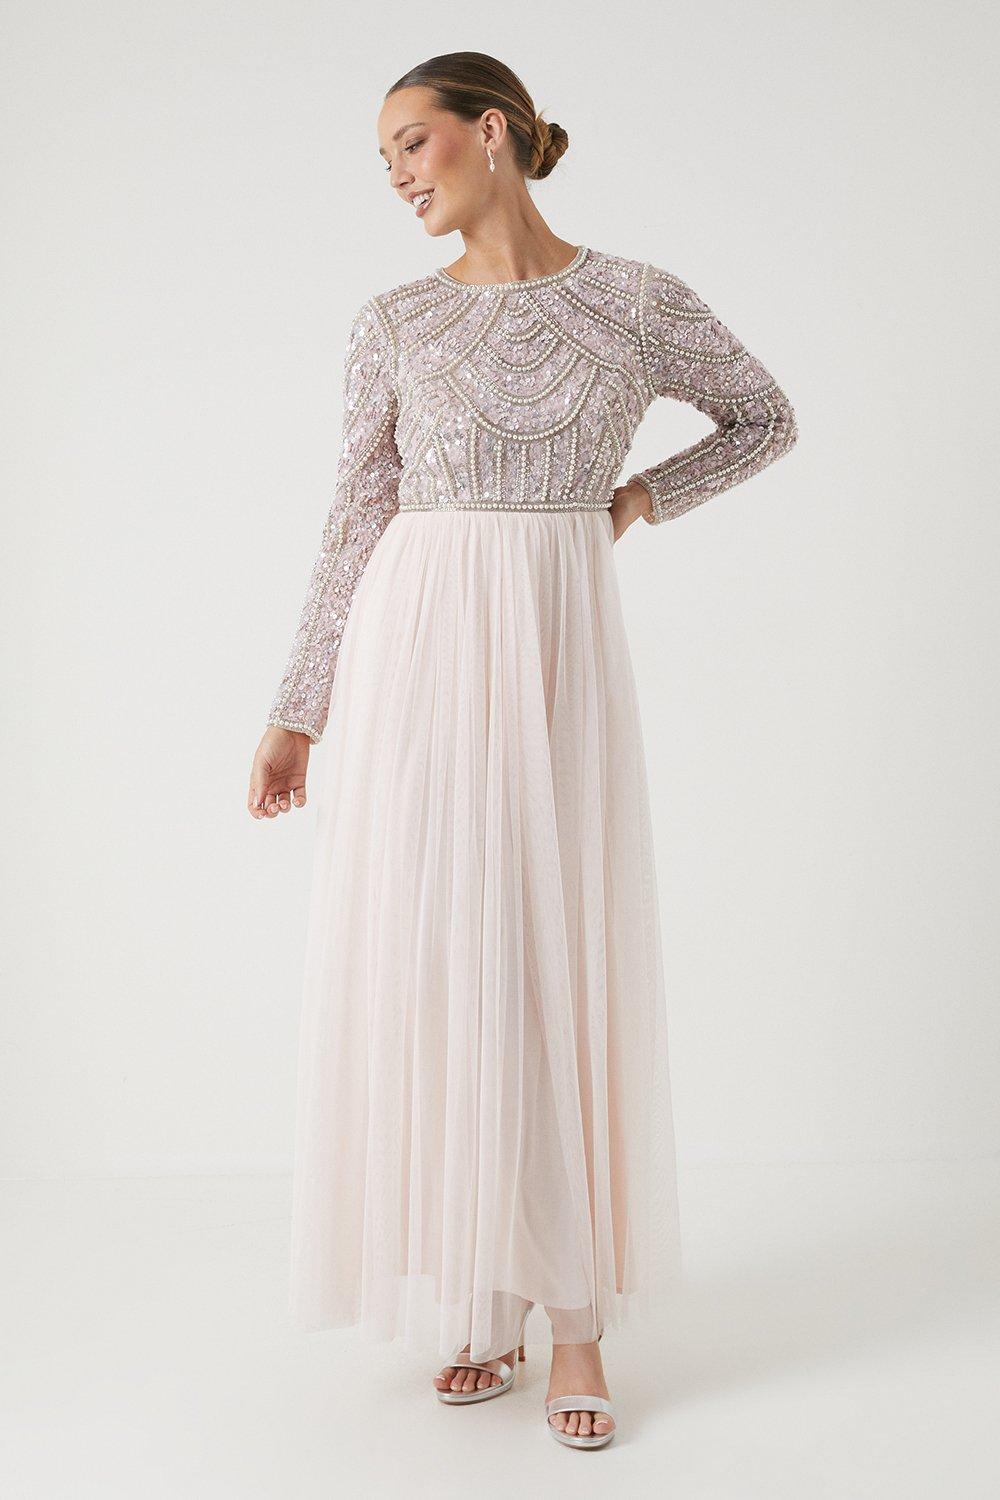 Pearl Embellished Bodice Bridesmaids Tulle Skirt Dress - Pale Pink